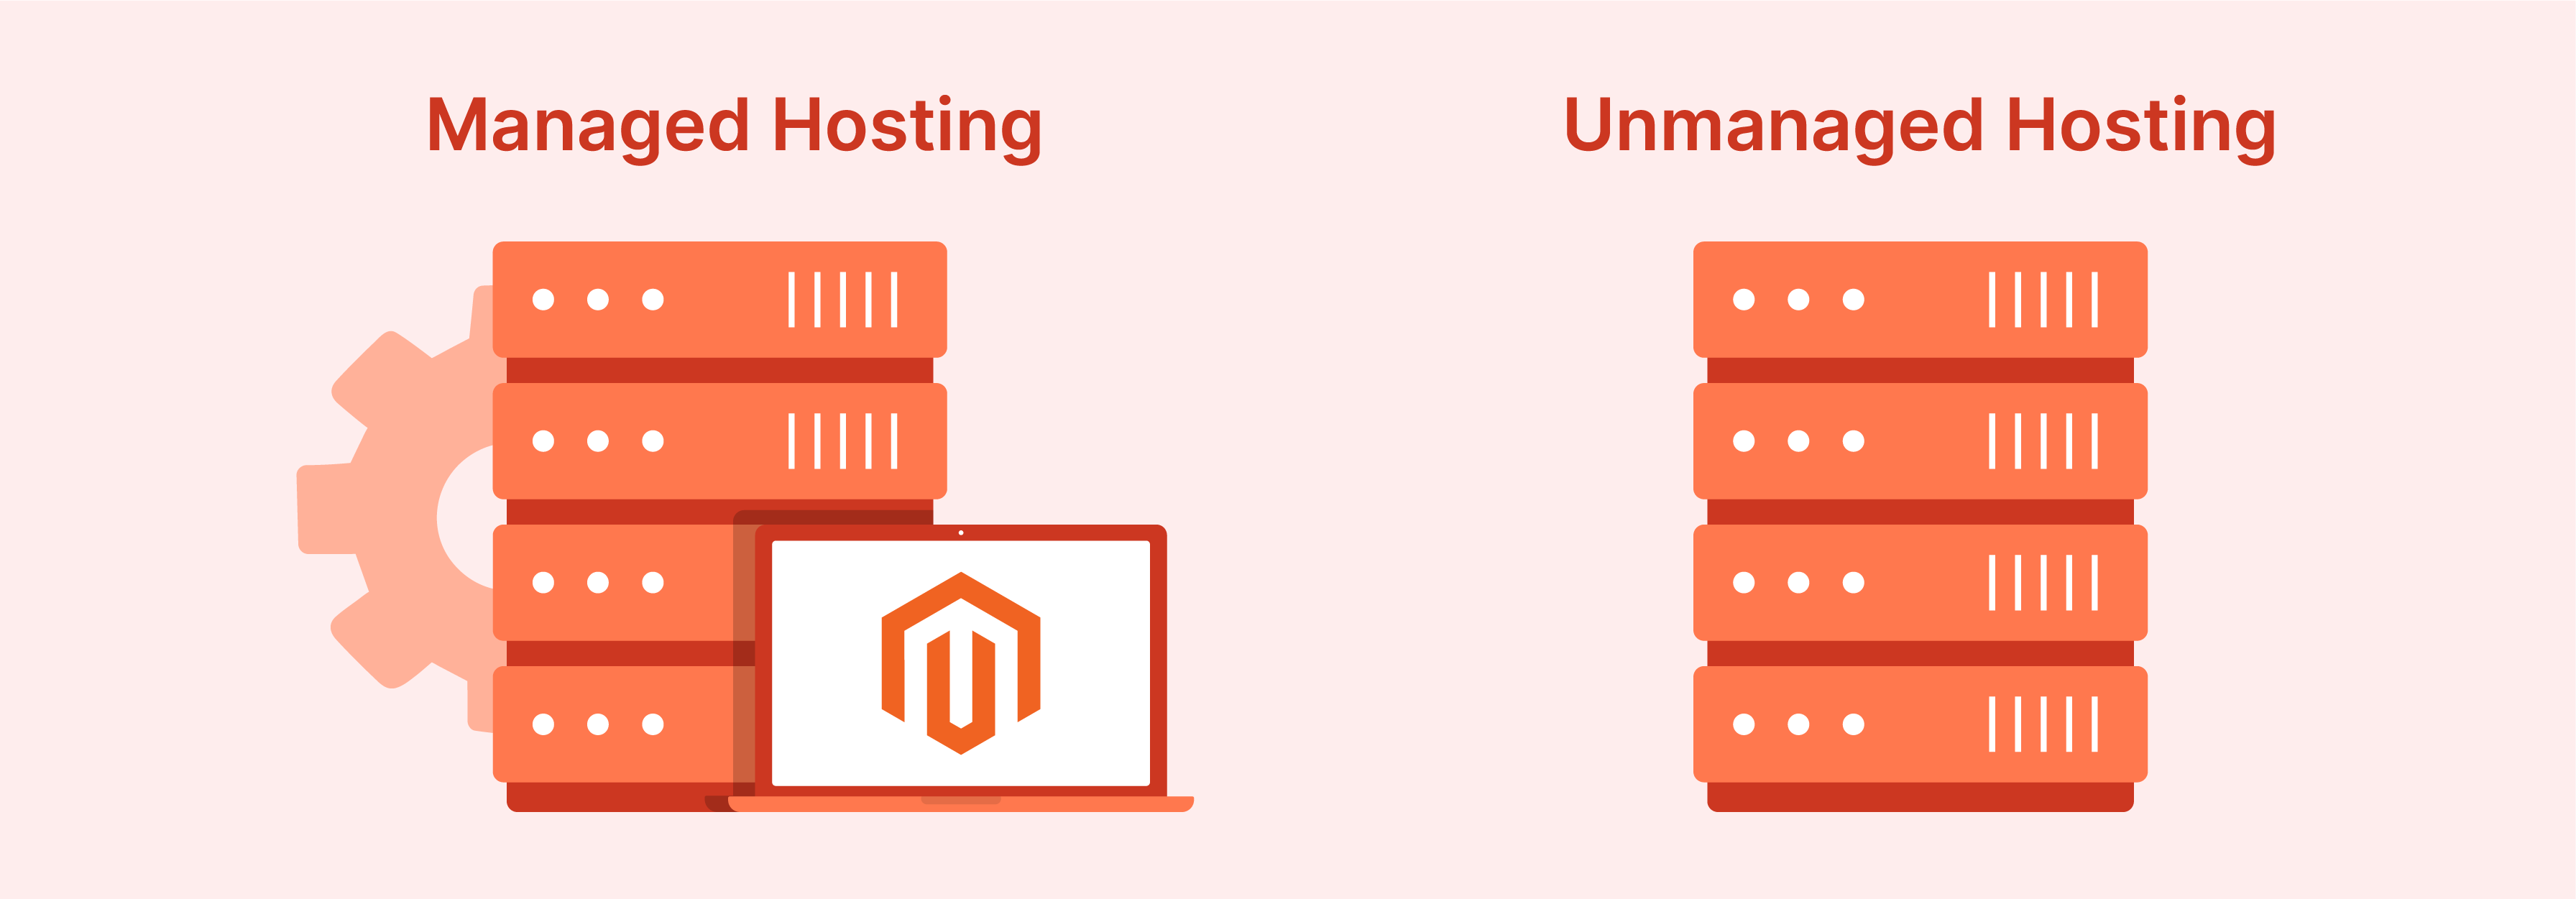 Comparison between managed and unmanaged hosting options for Magento